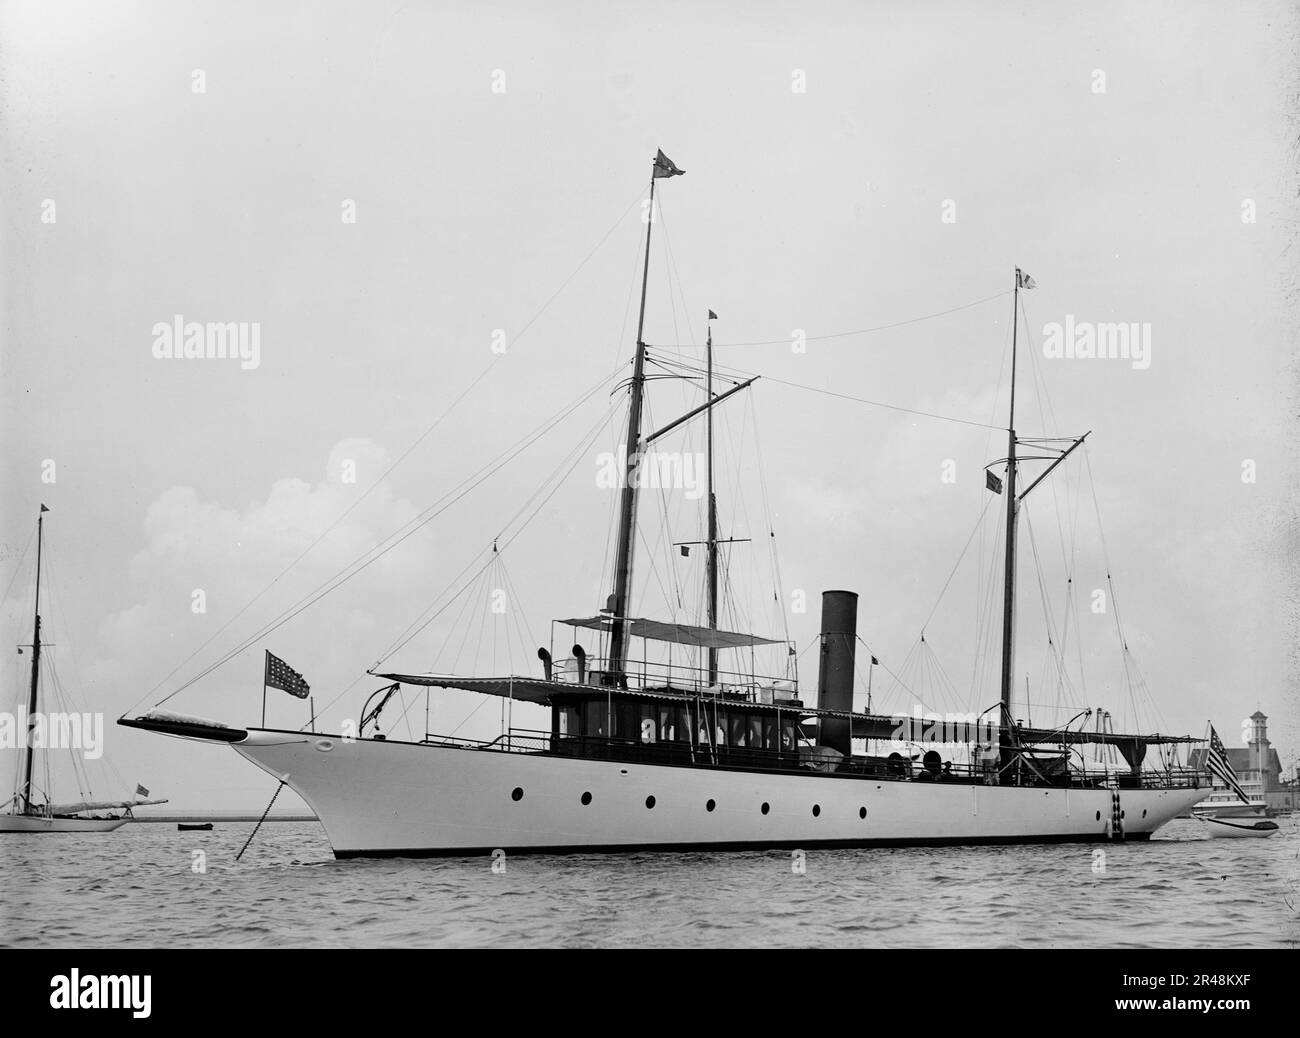 Ballymena, Newport, 1895 Aug 4. &quot;It appears that Ballymena ended her days as a supplier for rum runners in Gun Cay Harbor (Bahamas)&quot;. Stock Photo